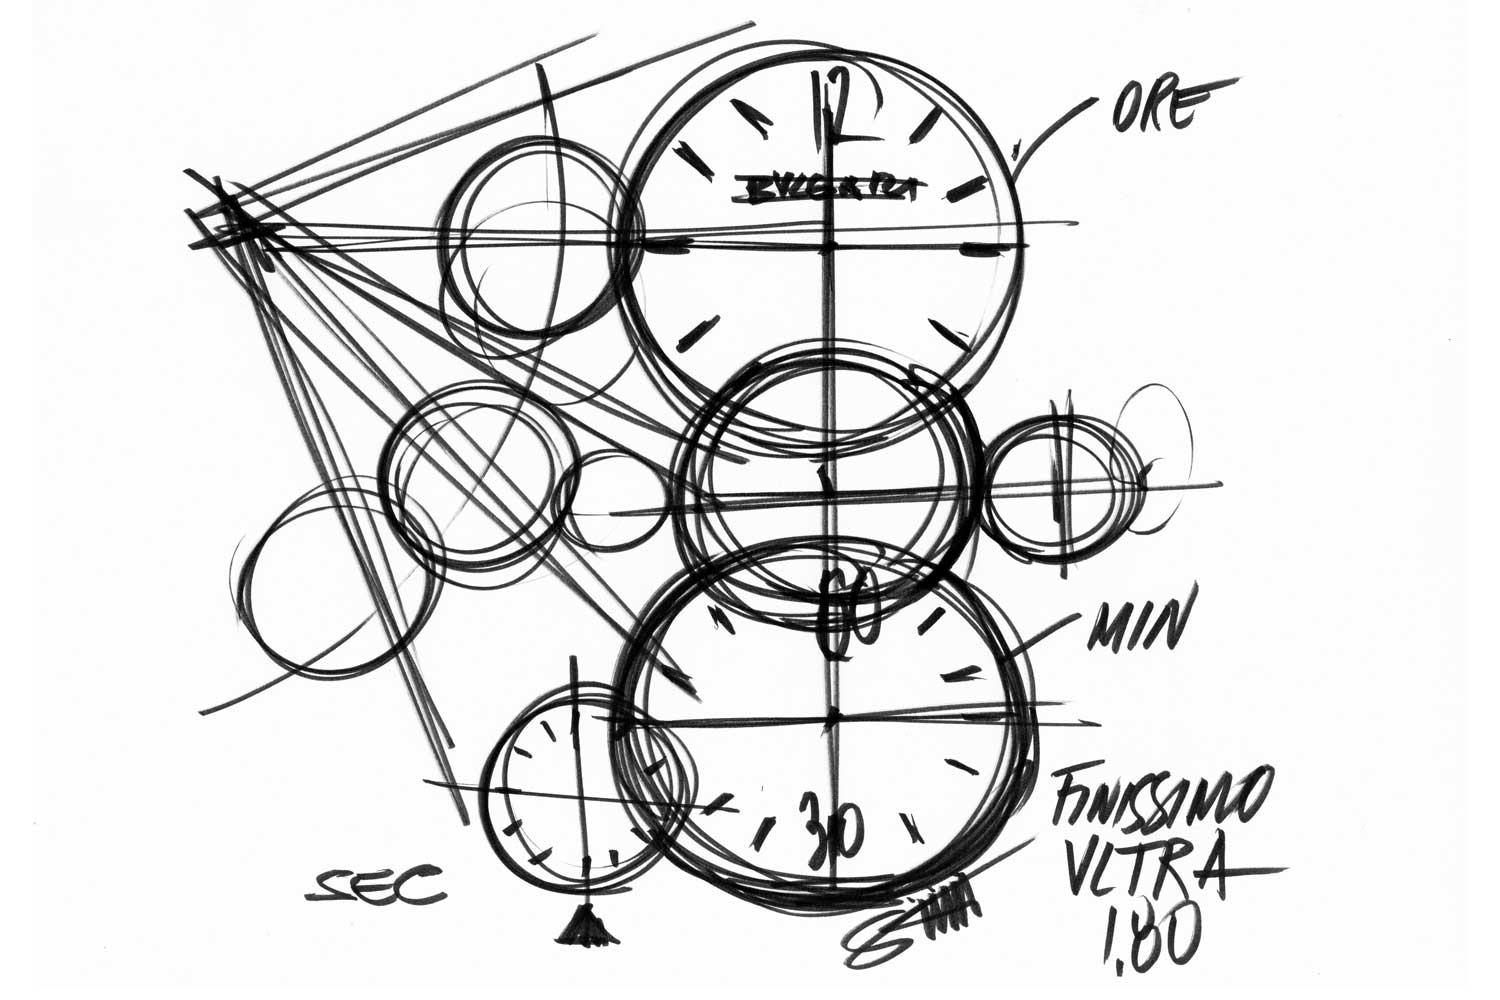 Buonamassa decided on a regulator-style dial design, with the motion work positioned not on the same axis